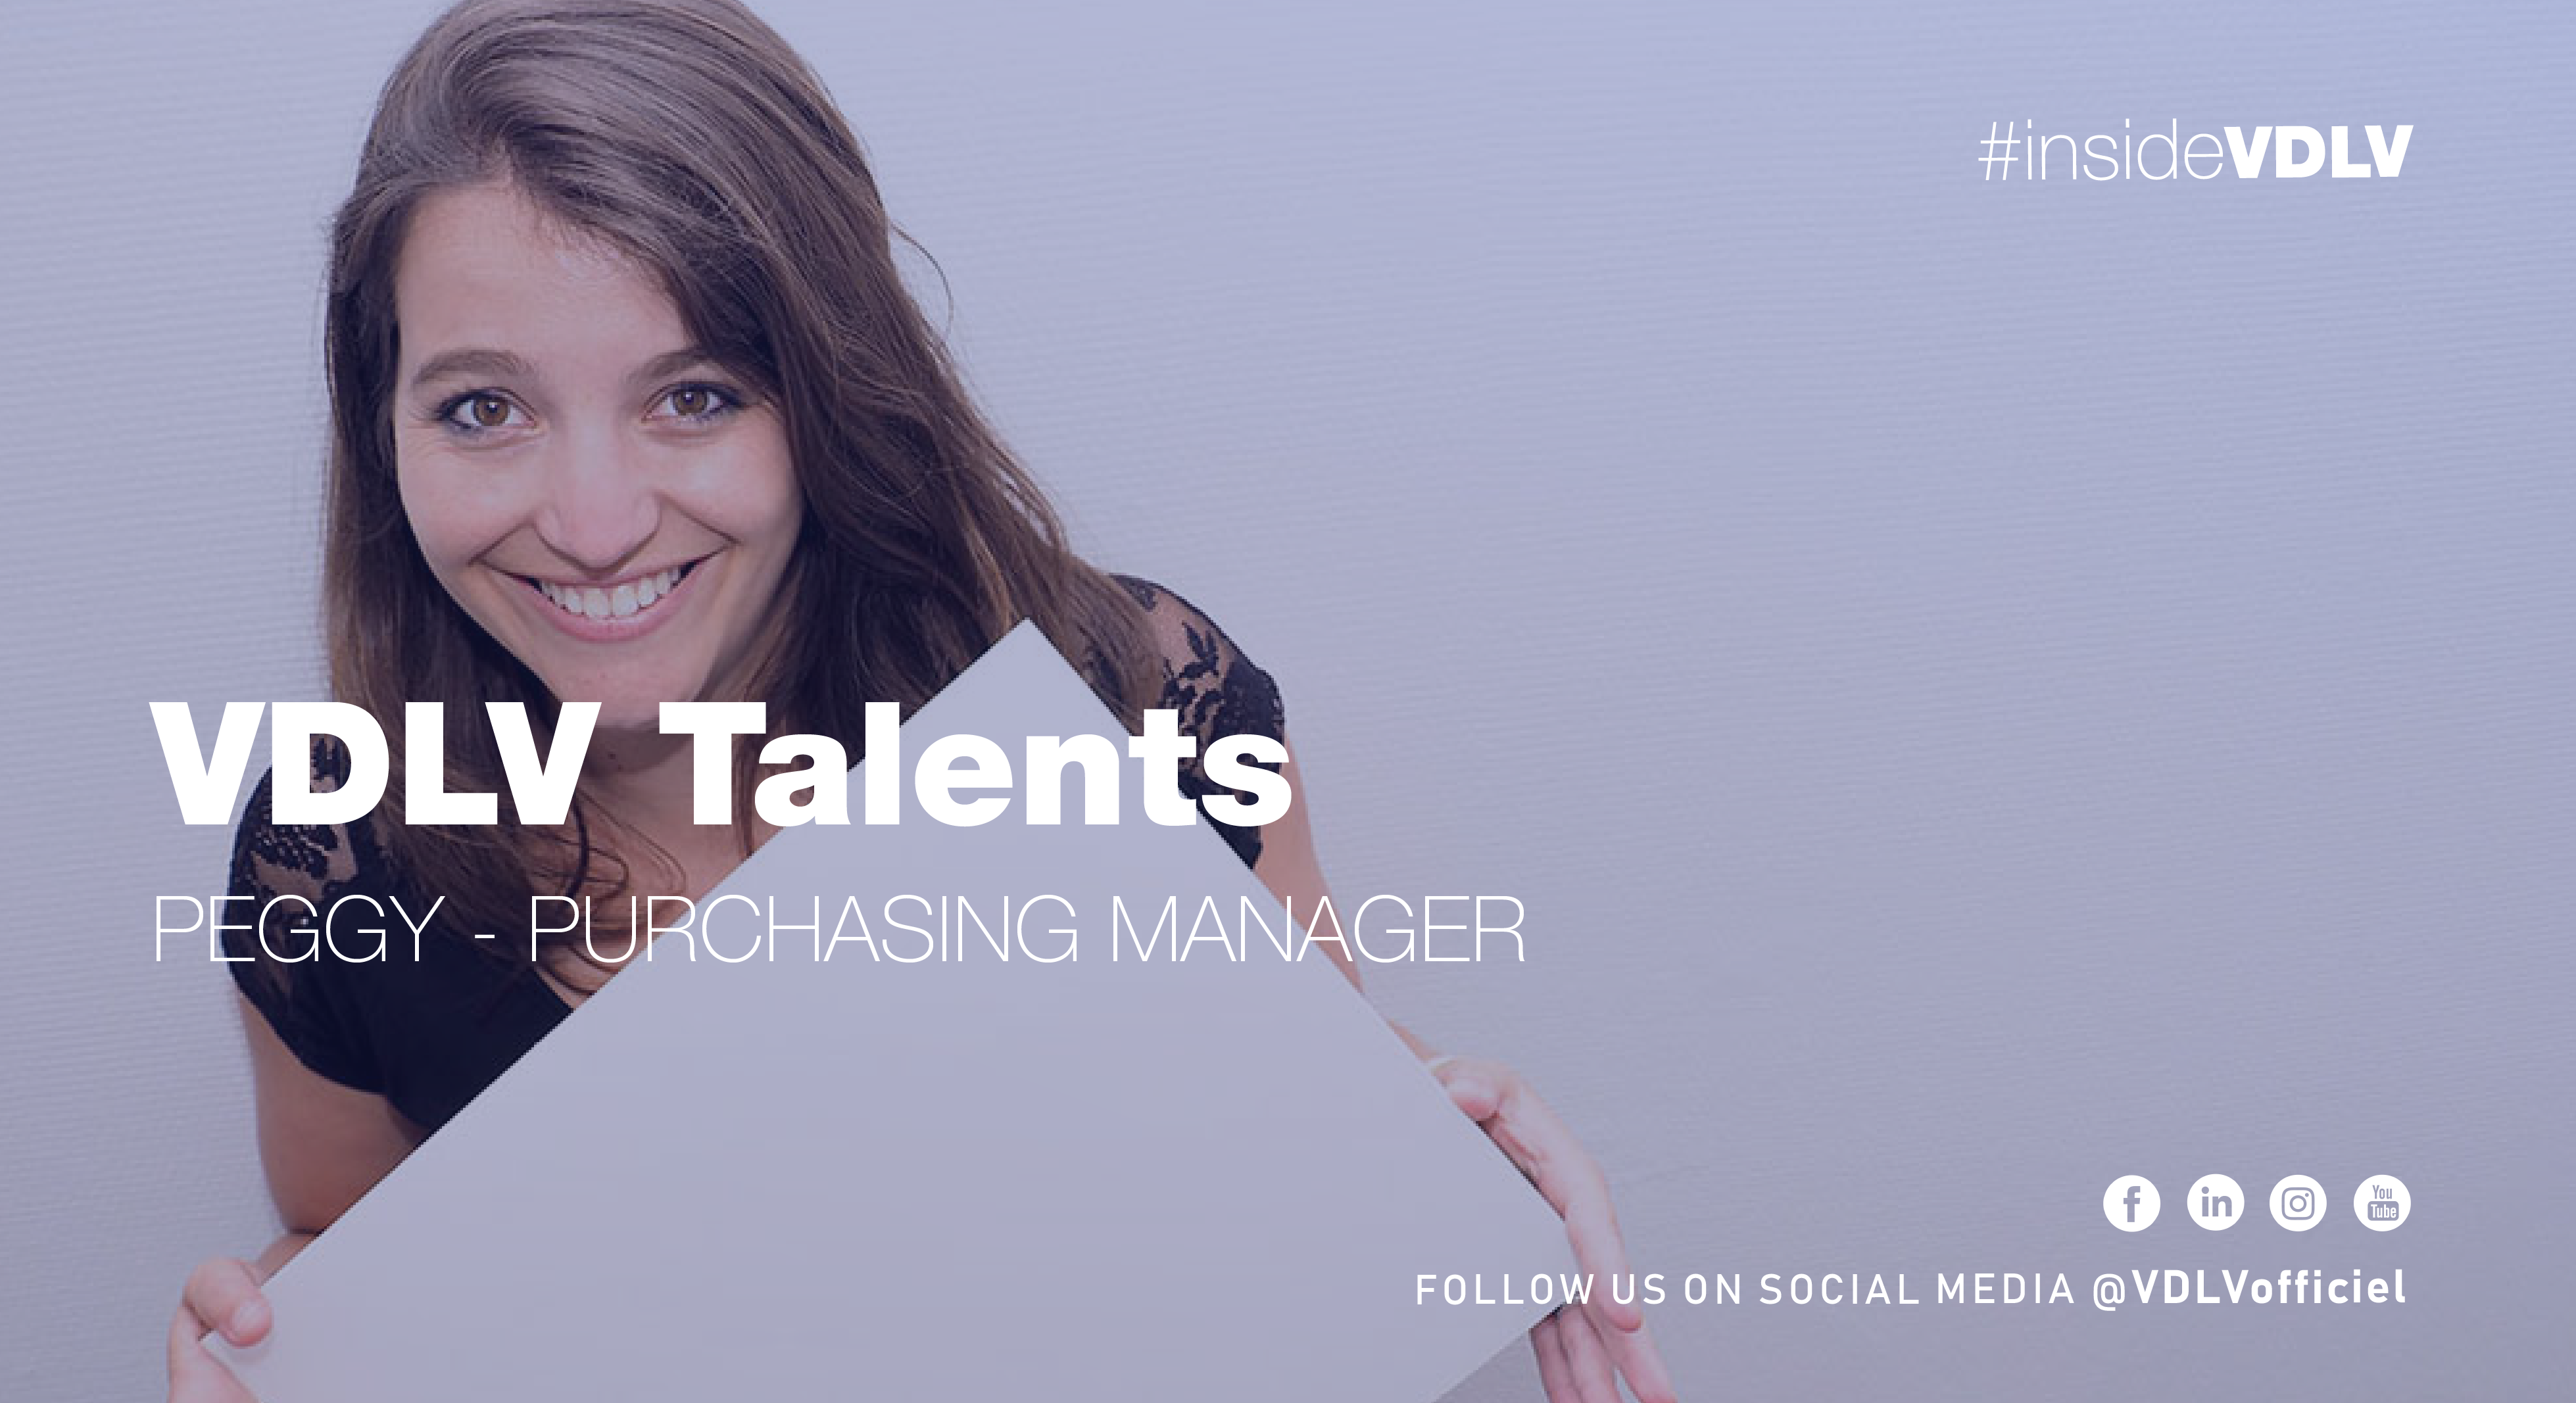 VDLV TALENTS – PEGGY – Purchasing Manager